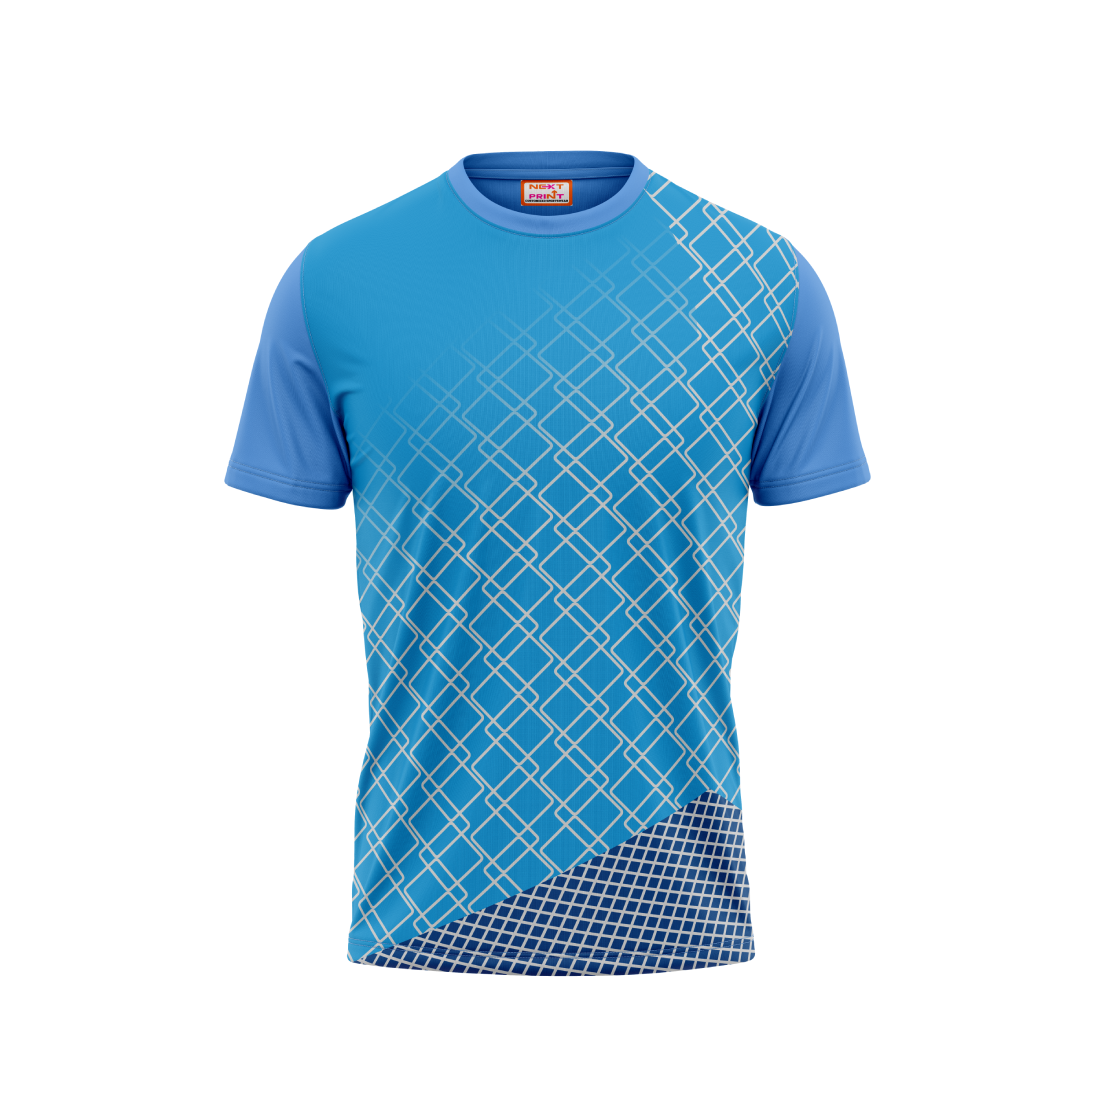 Round Neck Printed Jersey Skyblue NP5000020